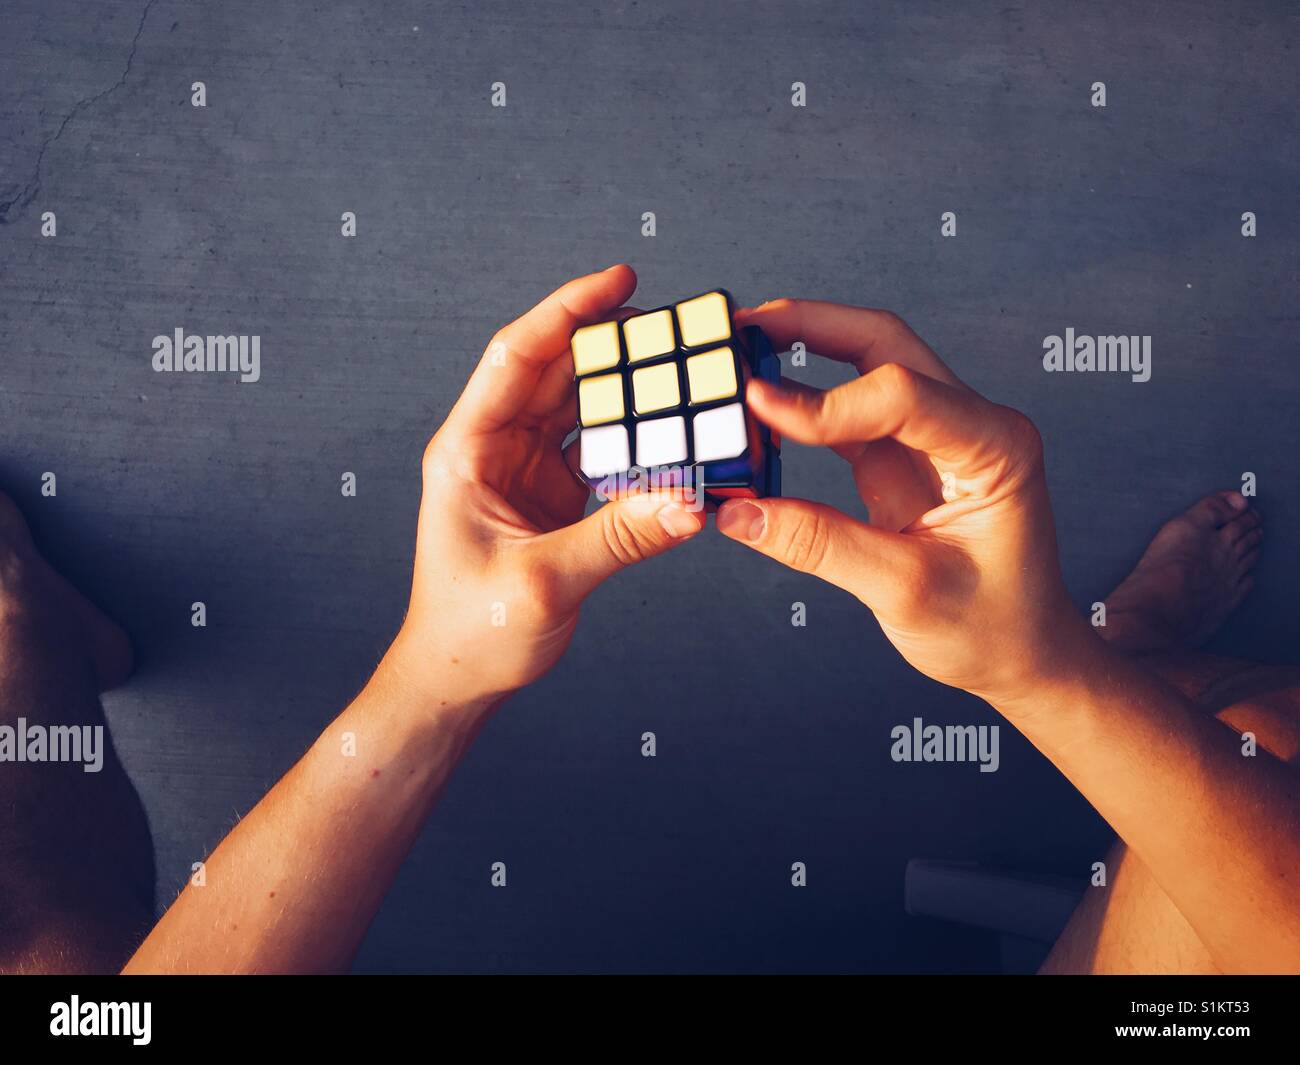 Point of view shot of a Rubik's Cube being solved a young man. Stock Photo